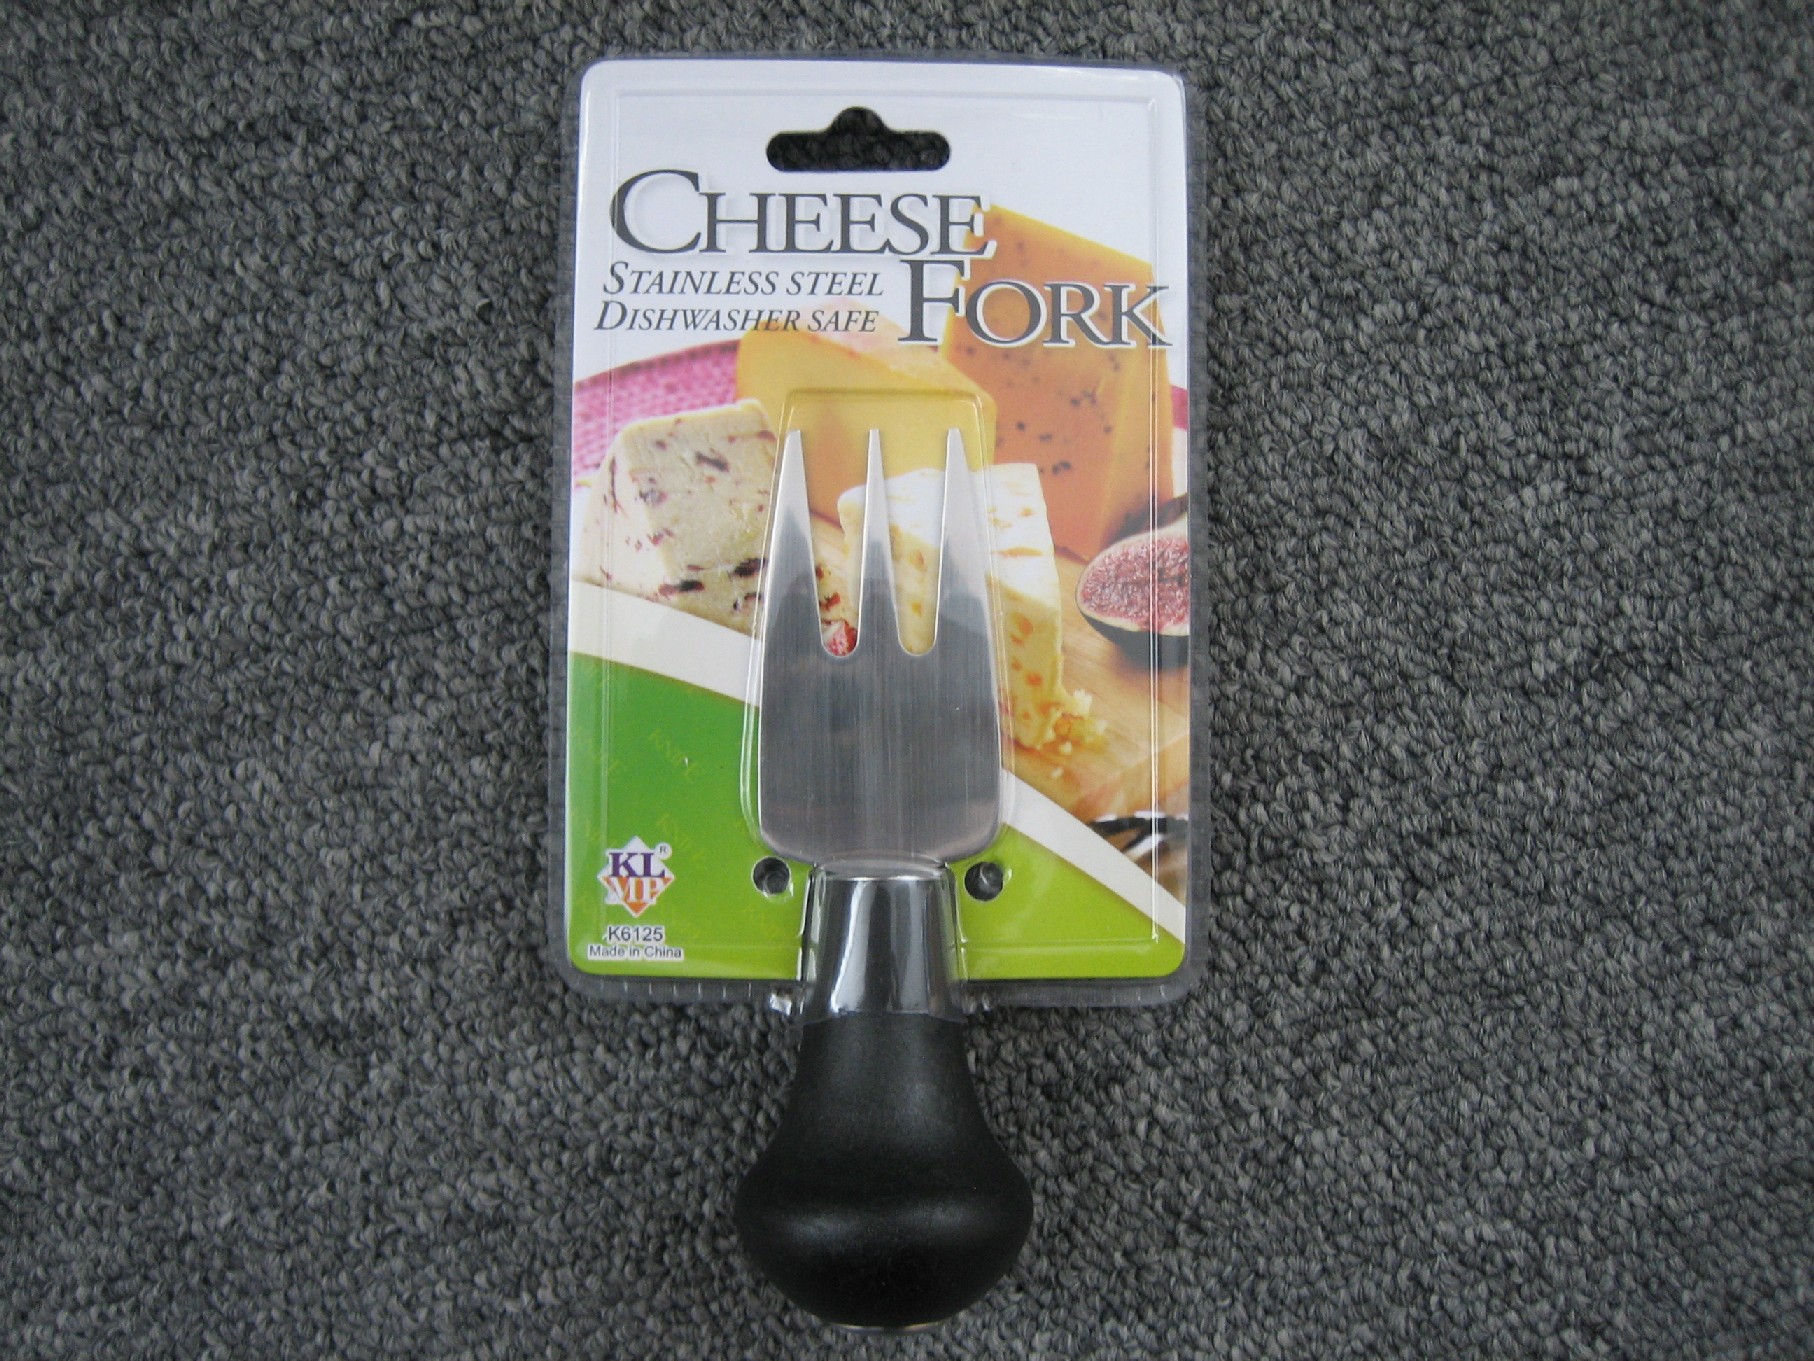 K6125 S.S. CHEESE FORK